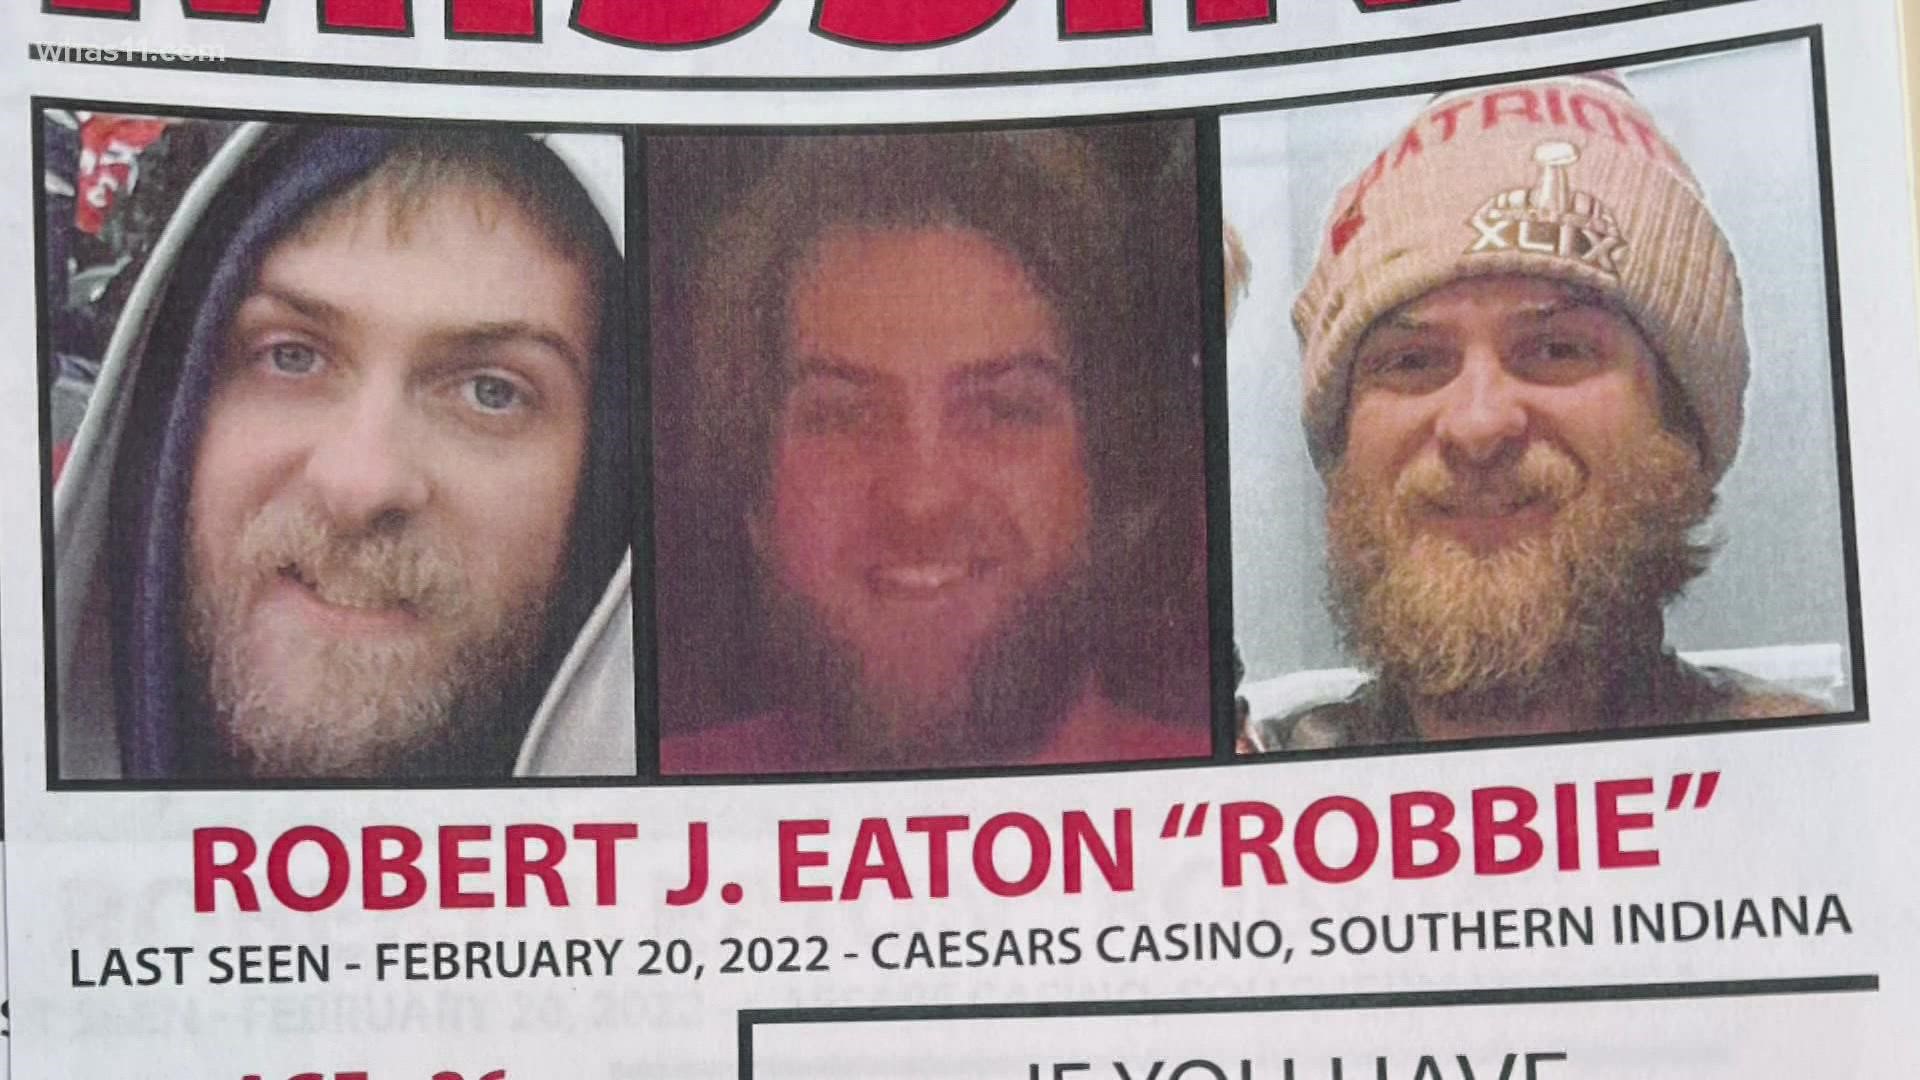 The family of Robert Eaton said he was last seen leaving Caesars Southern Indiana in Elizabeth around 10:30 p.m. on February 20.